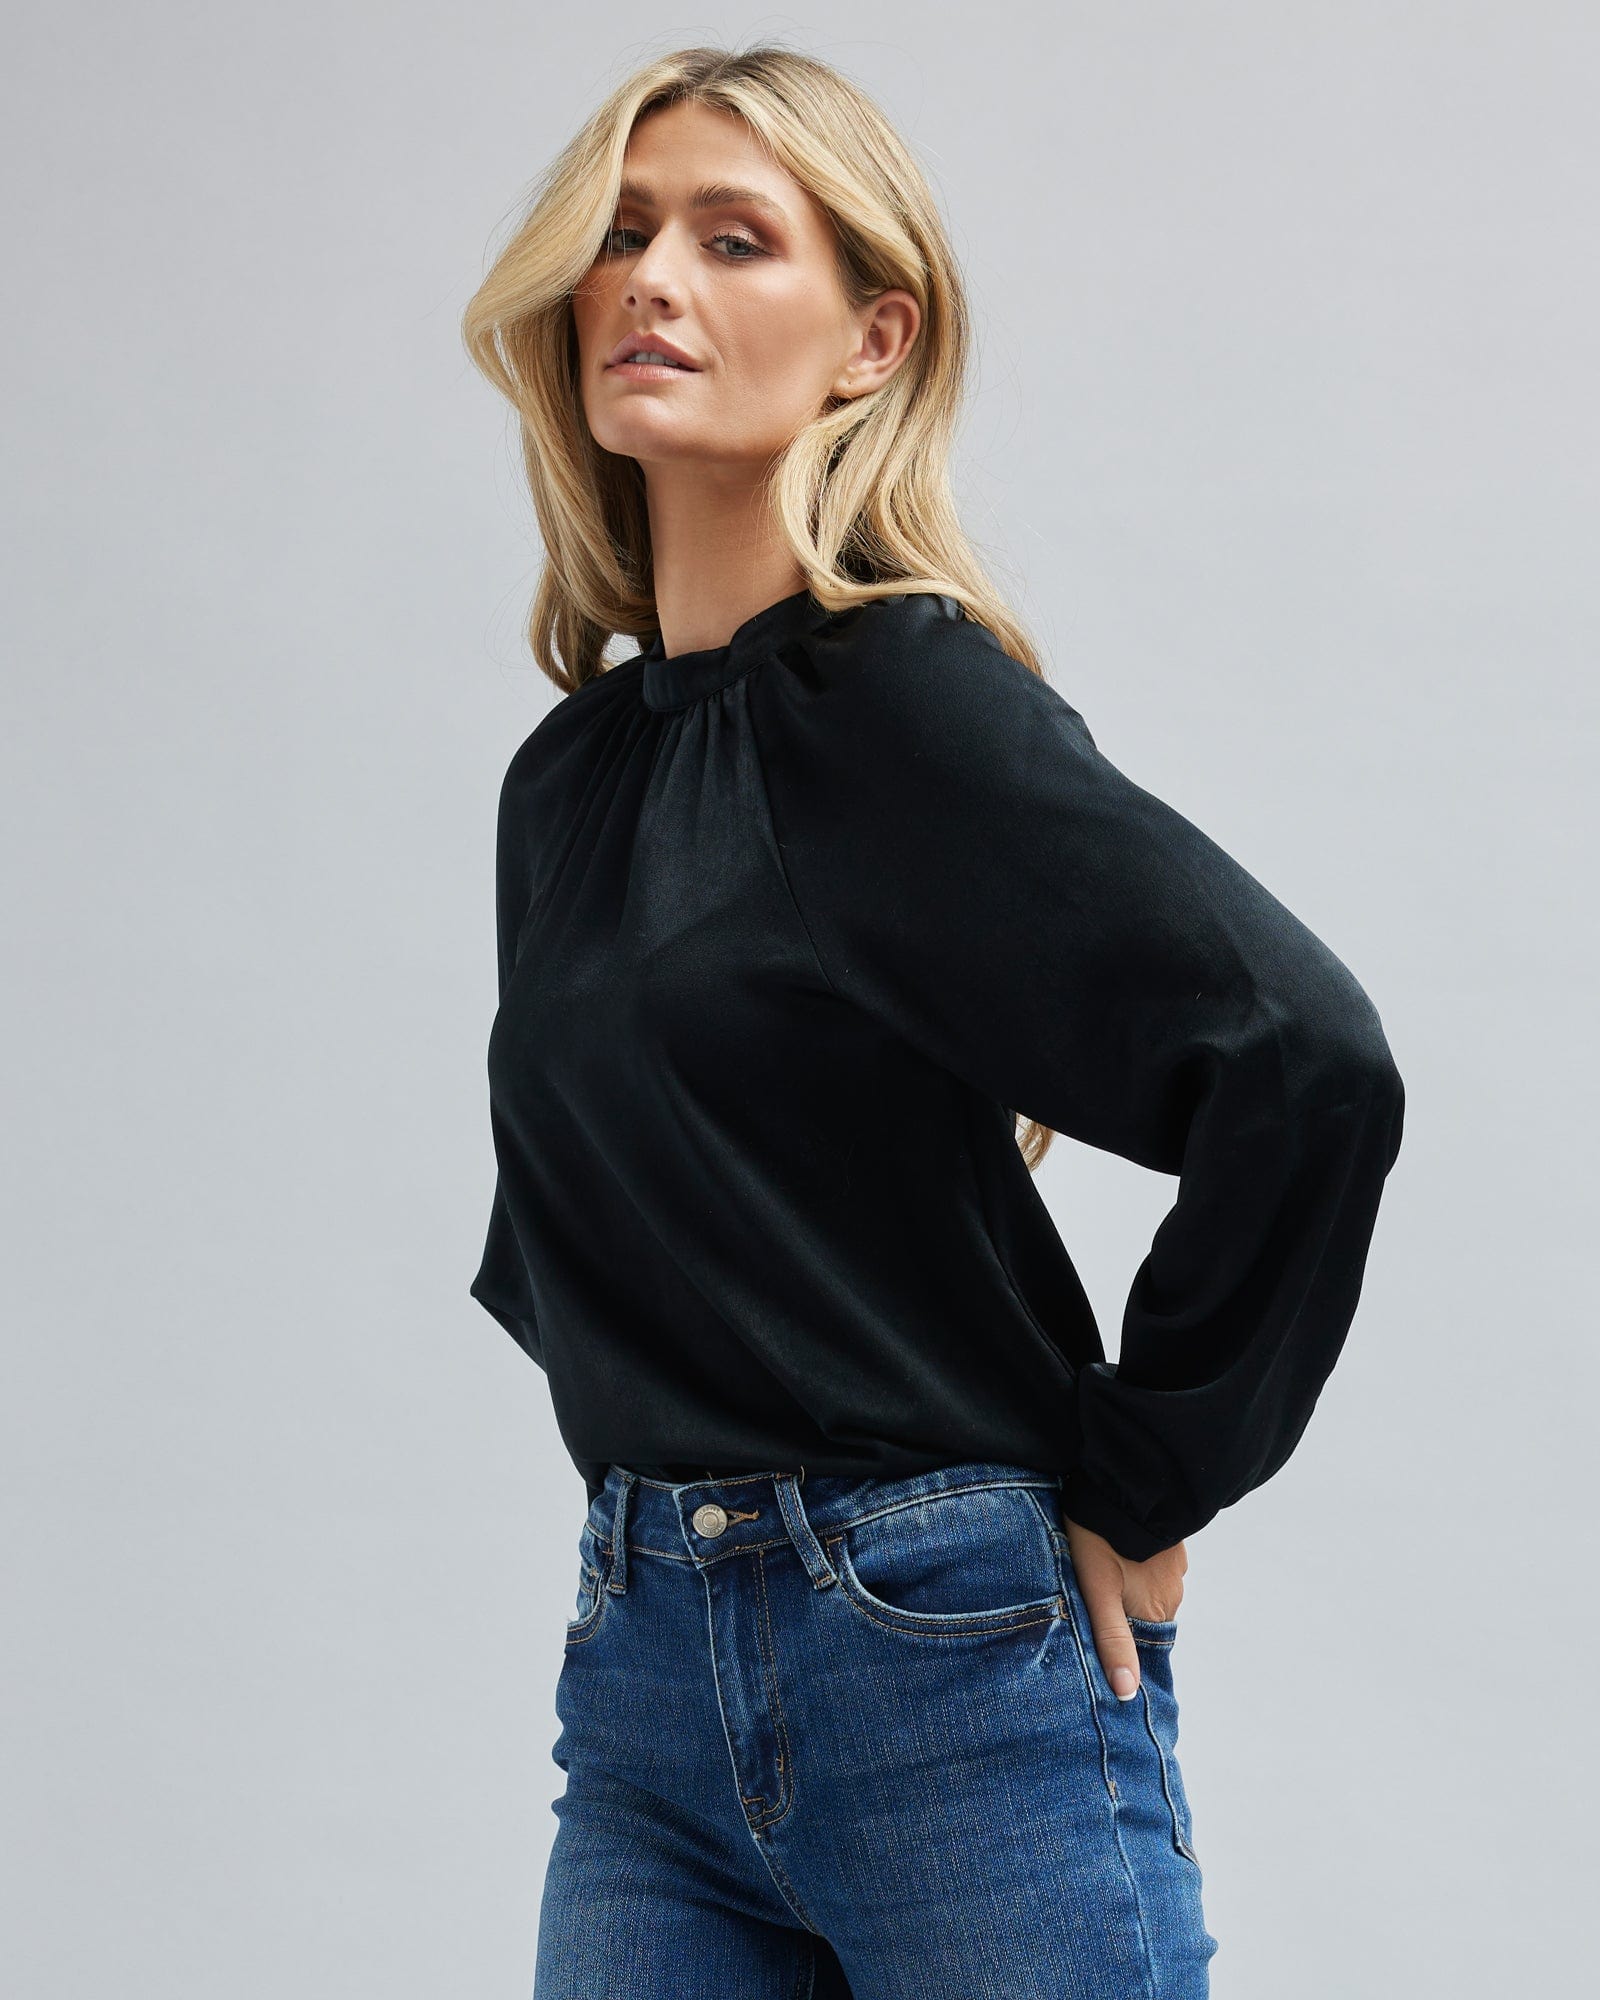 Woman in a high neck, long sleeved, black blouse